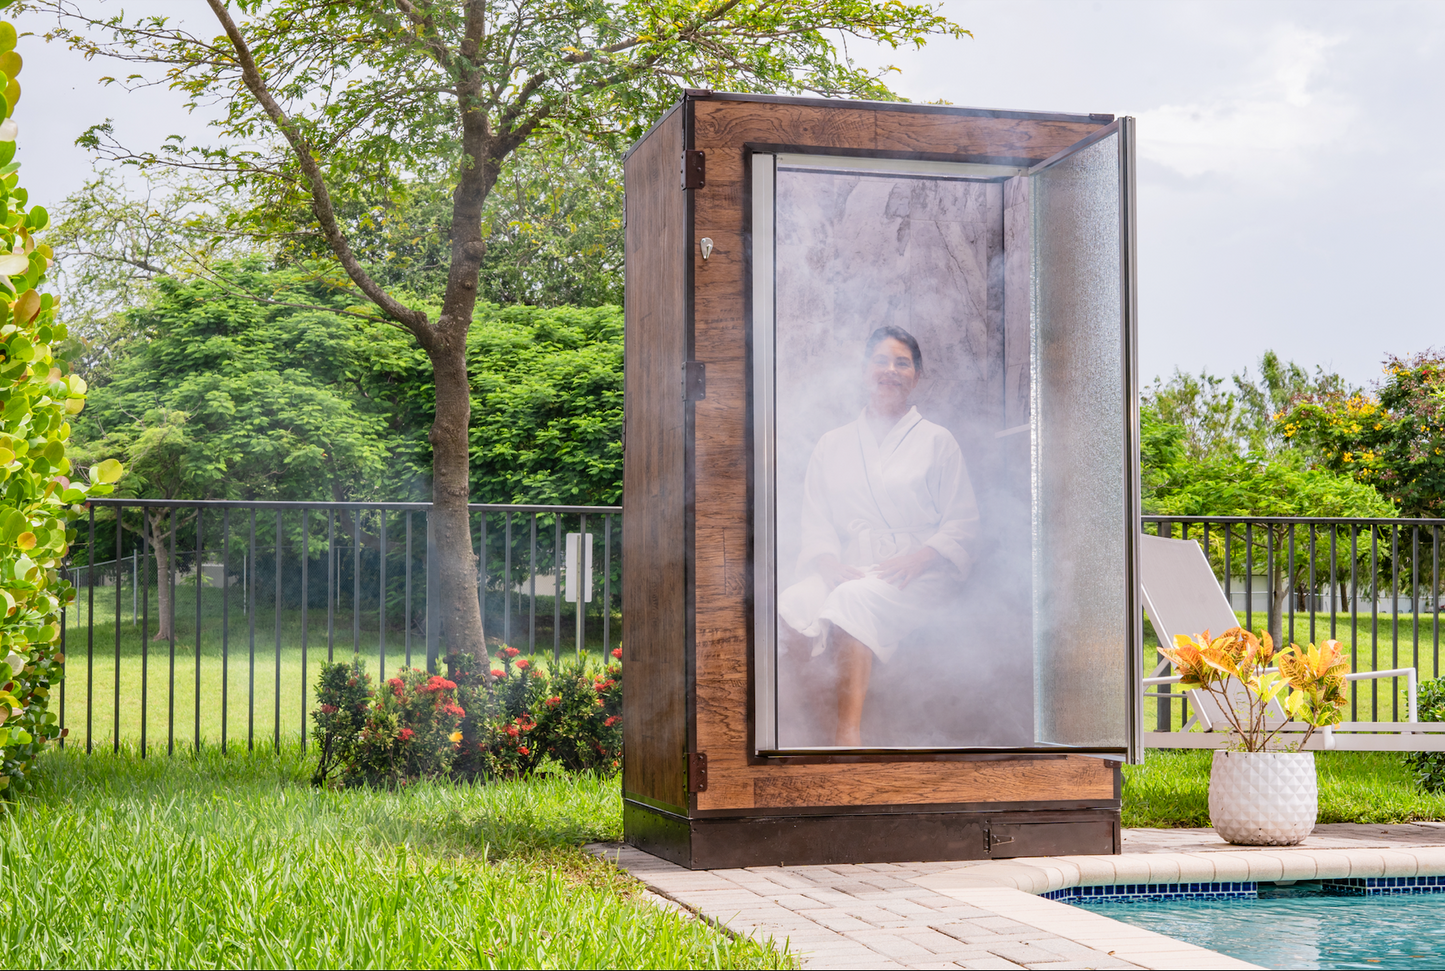 SOLD OUT - Excelsior® 2 Person Indoor & Outdoor Steam Room / Made in USA